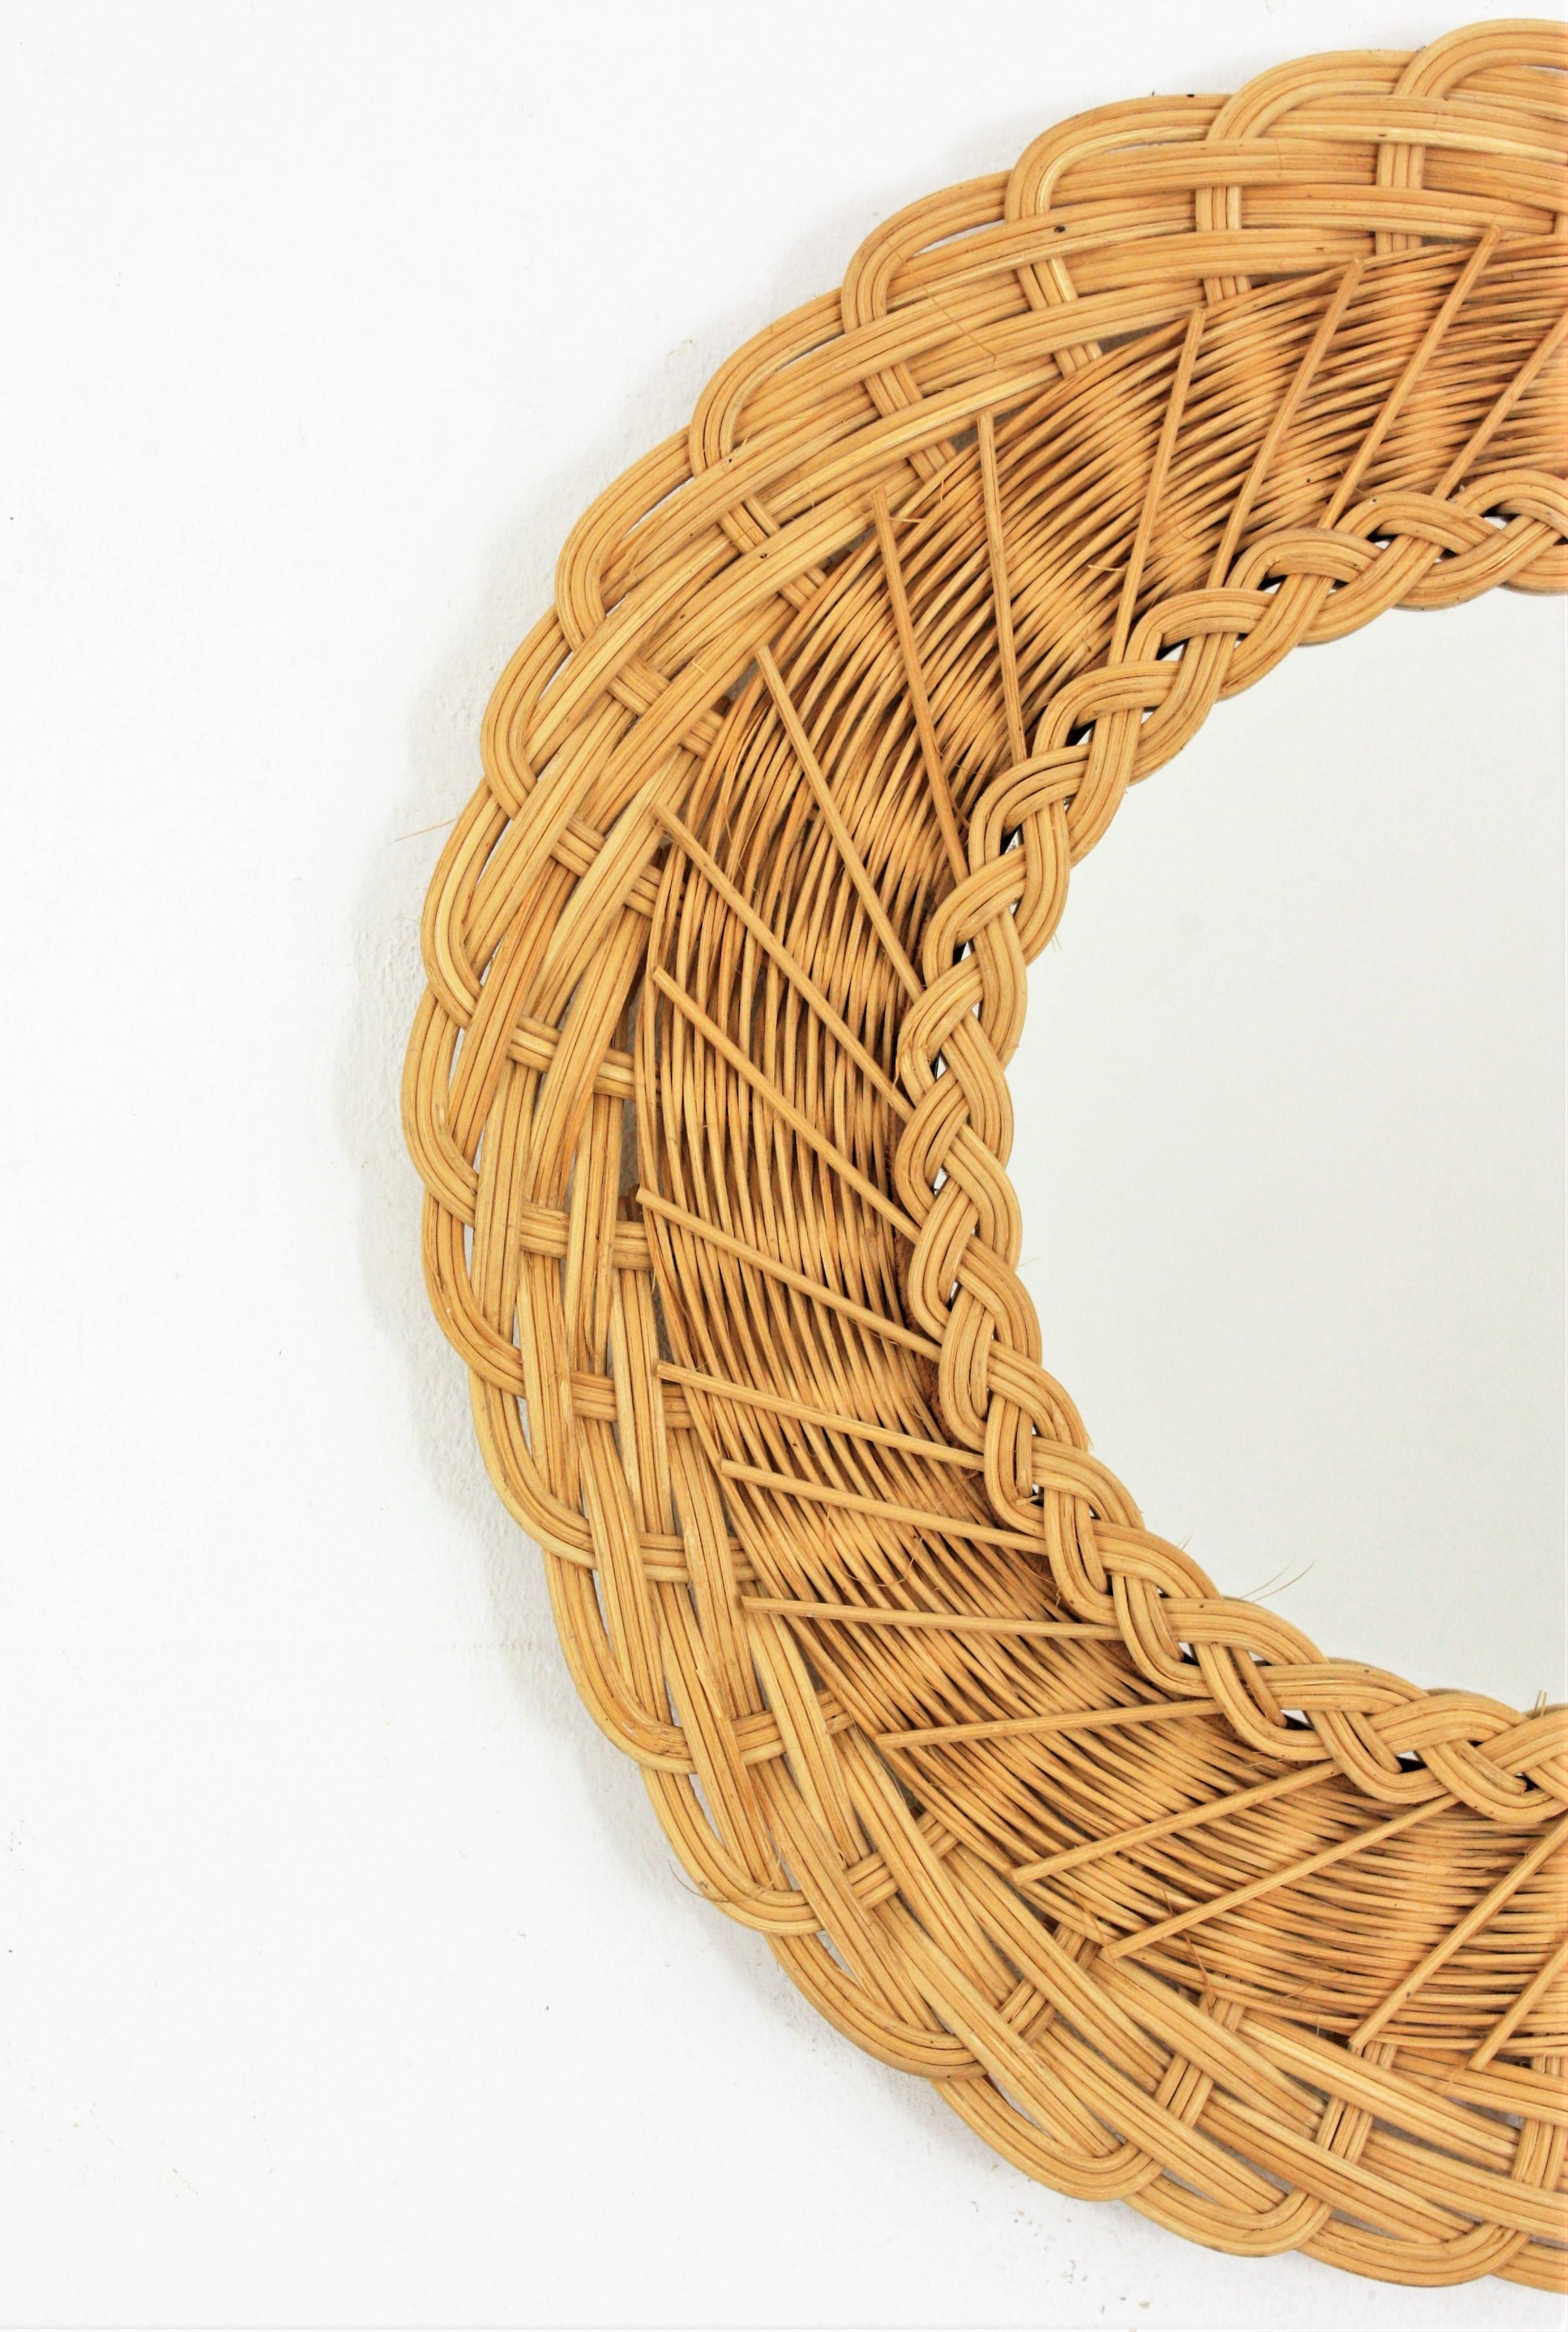 Hand-Woven French Hand Woven Rattan Wicker Round Mirror, 1960s For Sale